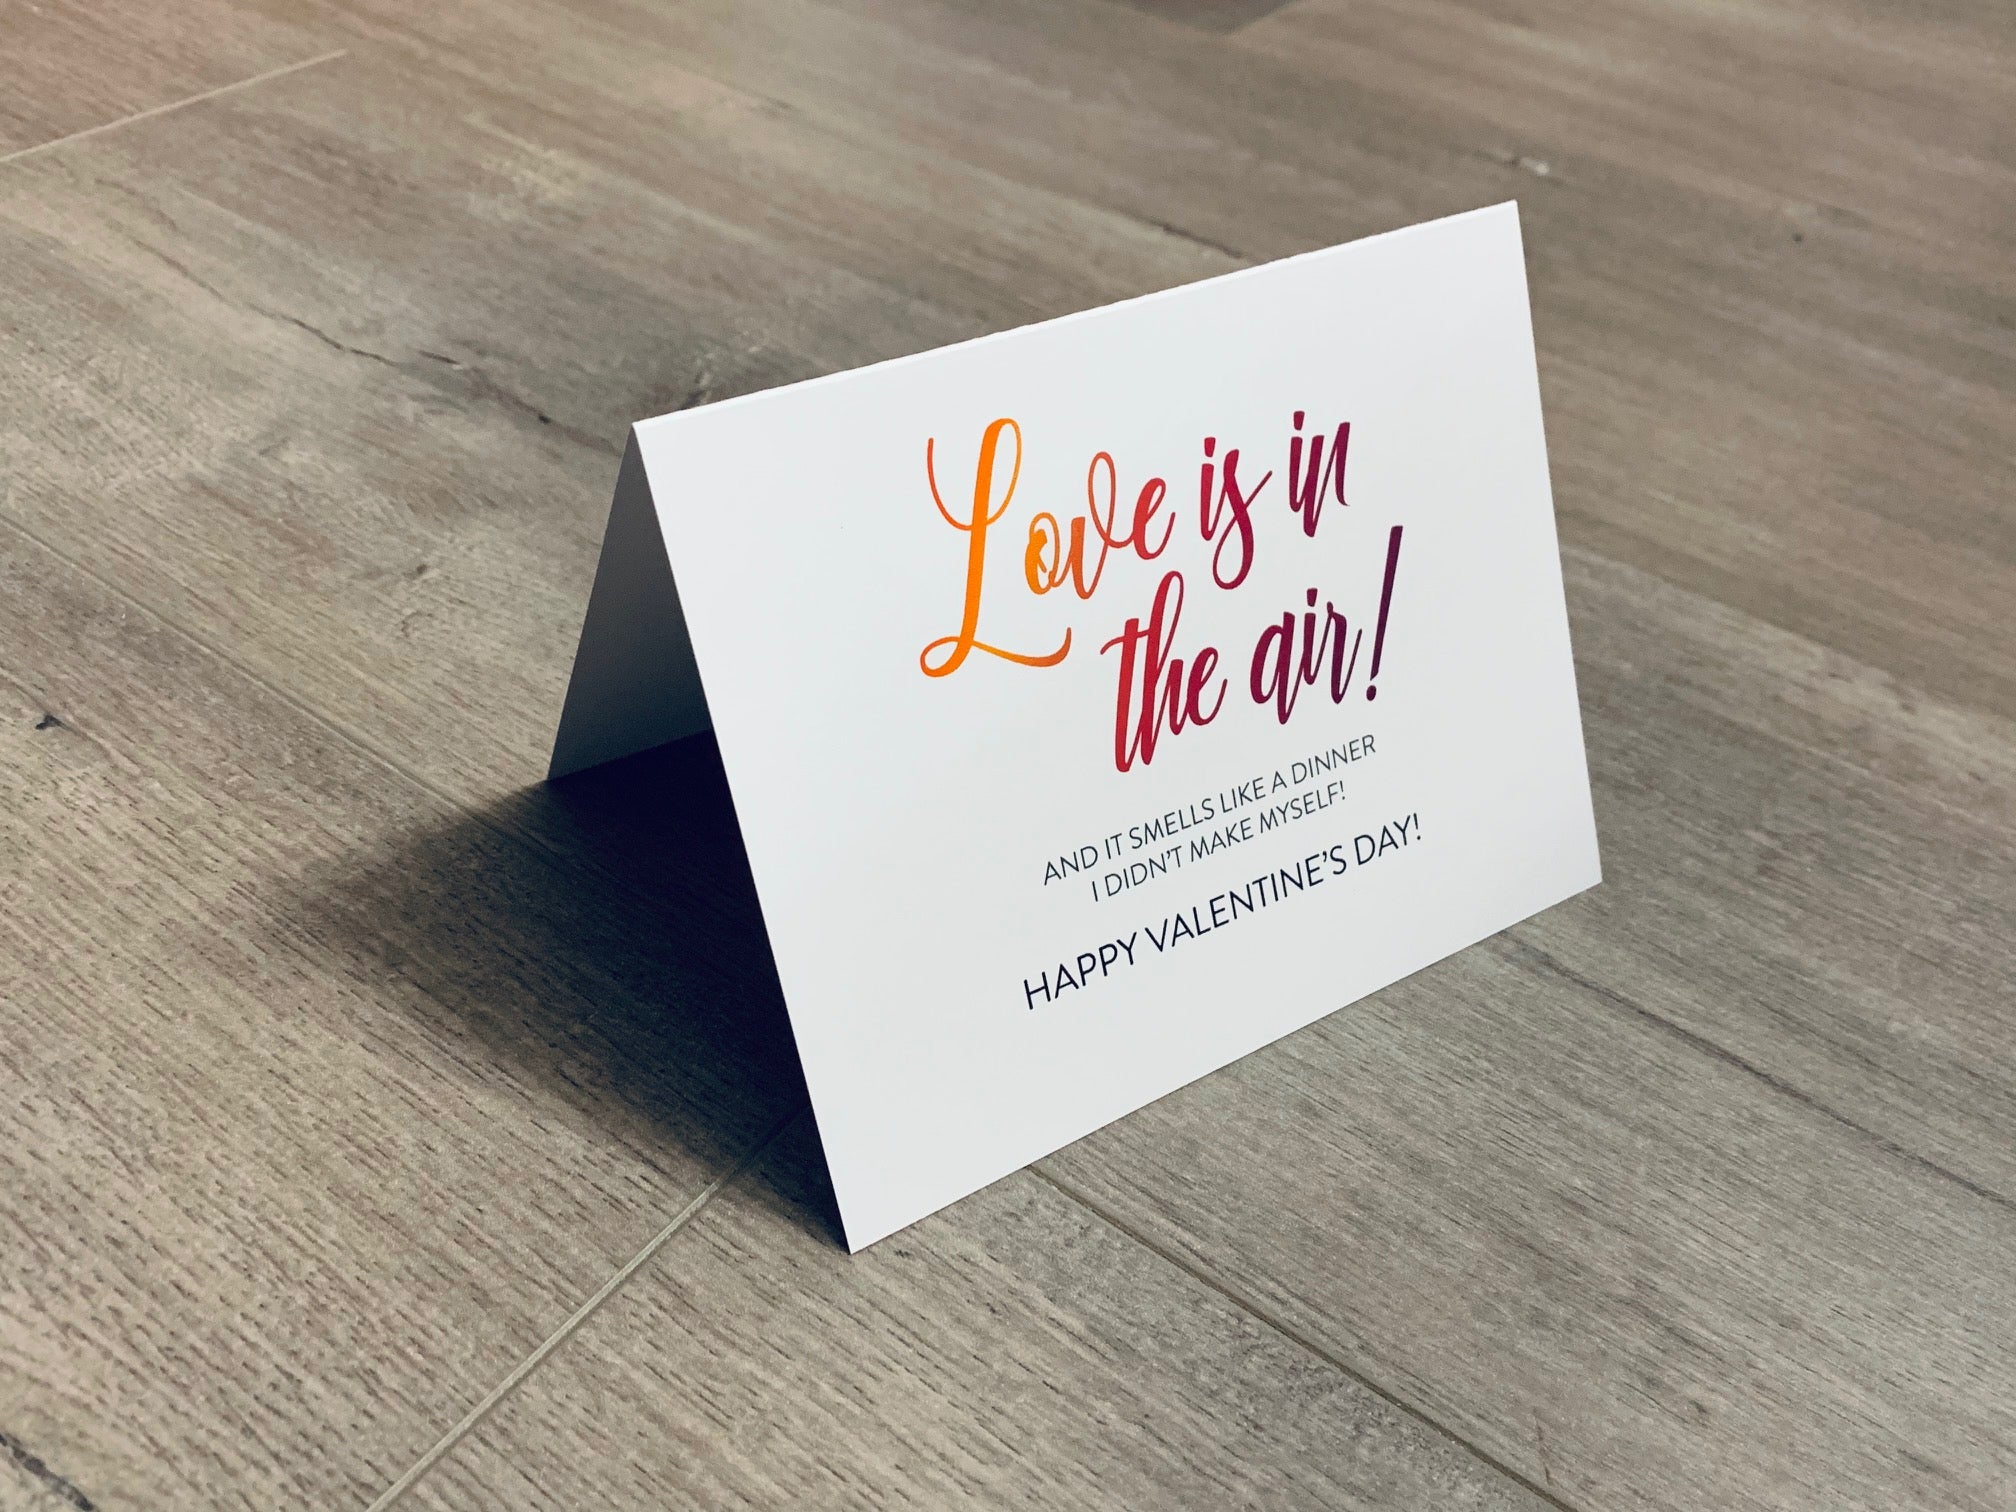 A folded white notecard is folded and propped up on a gray wooden background. The card says, "Love is in the air! And it smells like a dinner I didn't make myself! Happy Valentine's Day!" Valentine Smiles collection by Stationare.